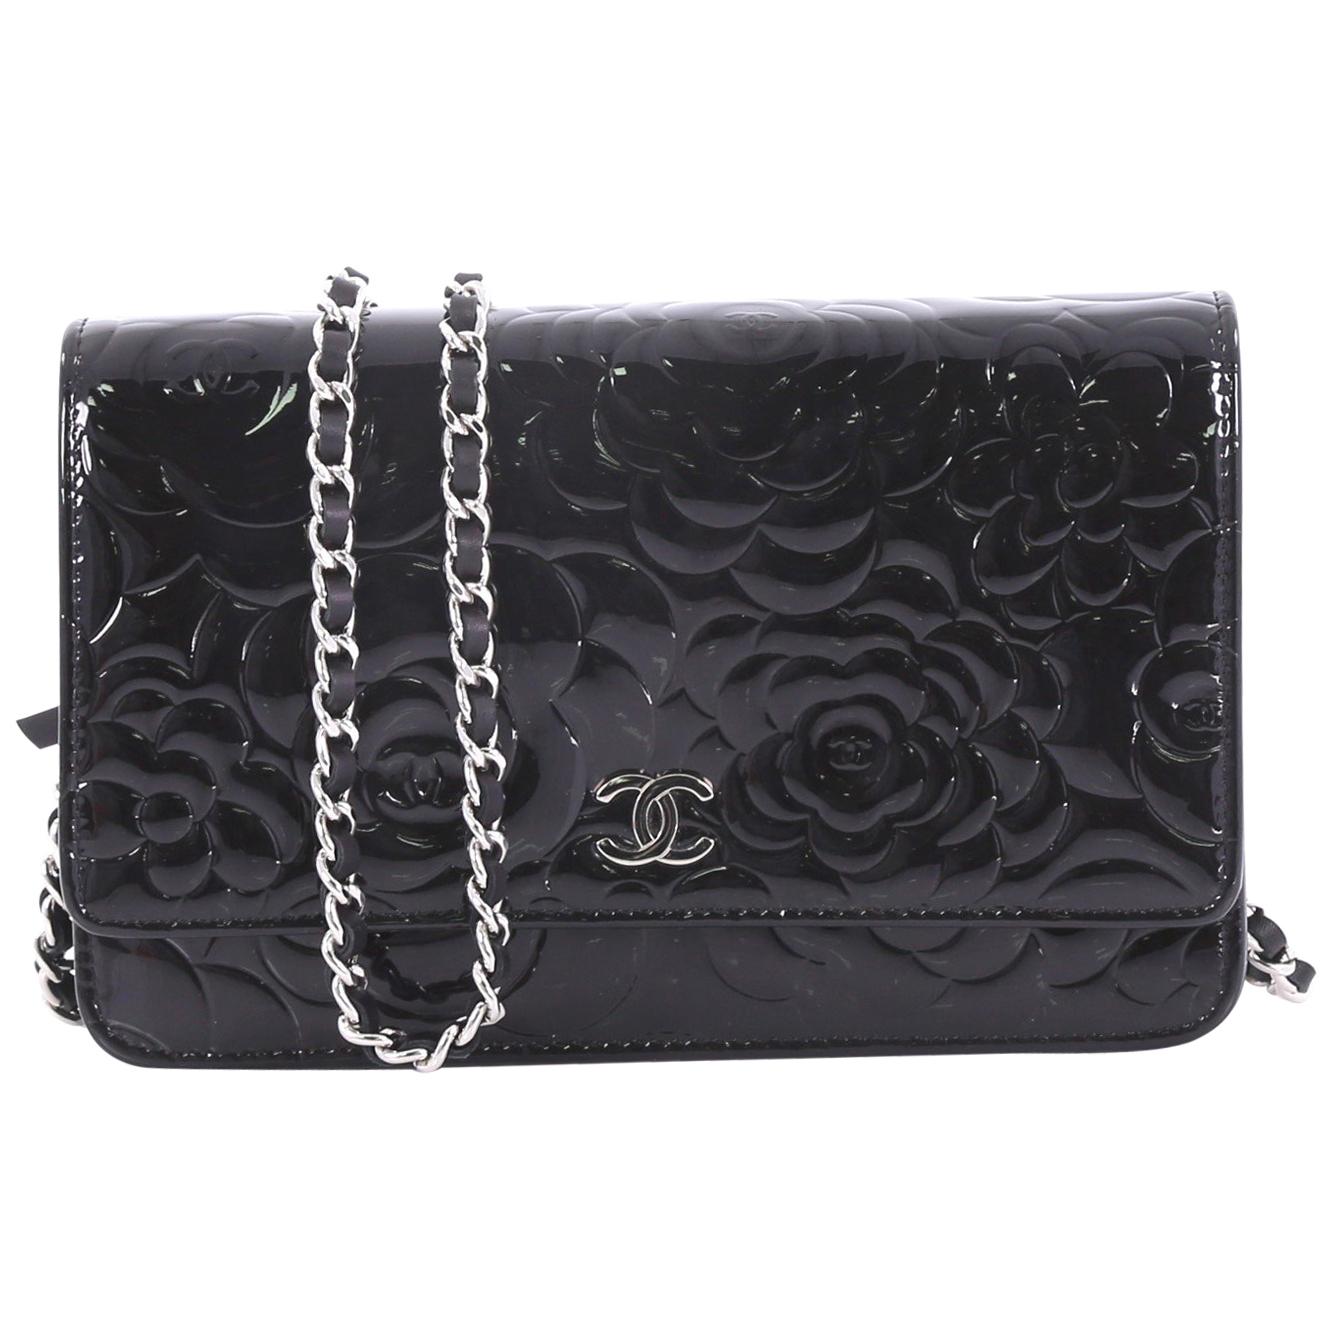 Chanel Wallet on Chain Camellia Patent